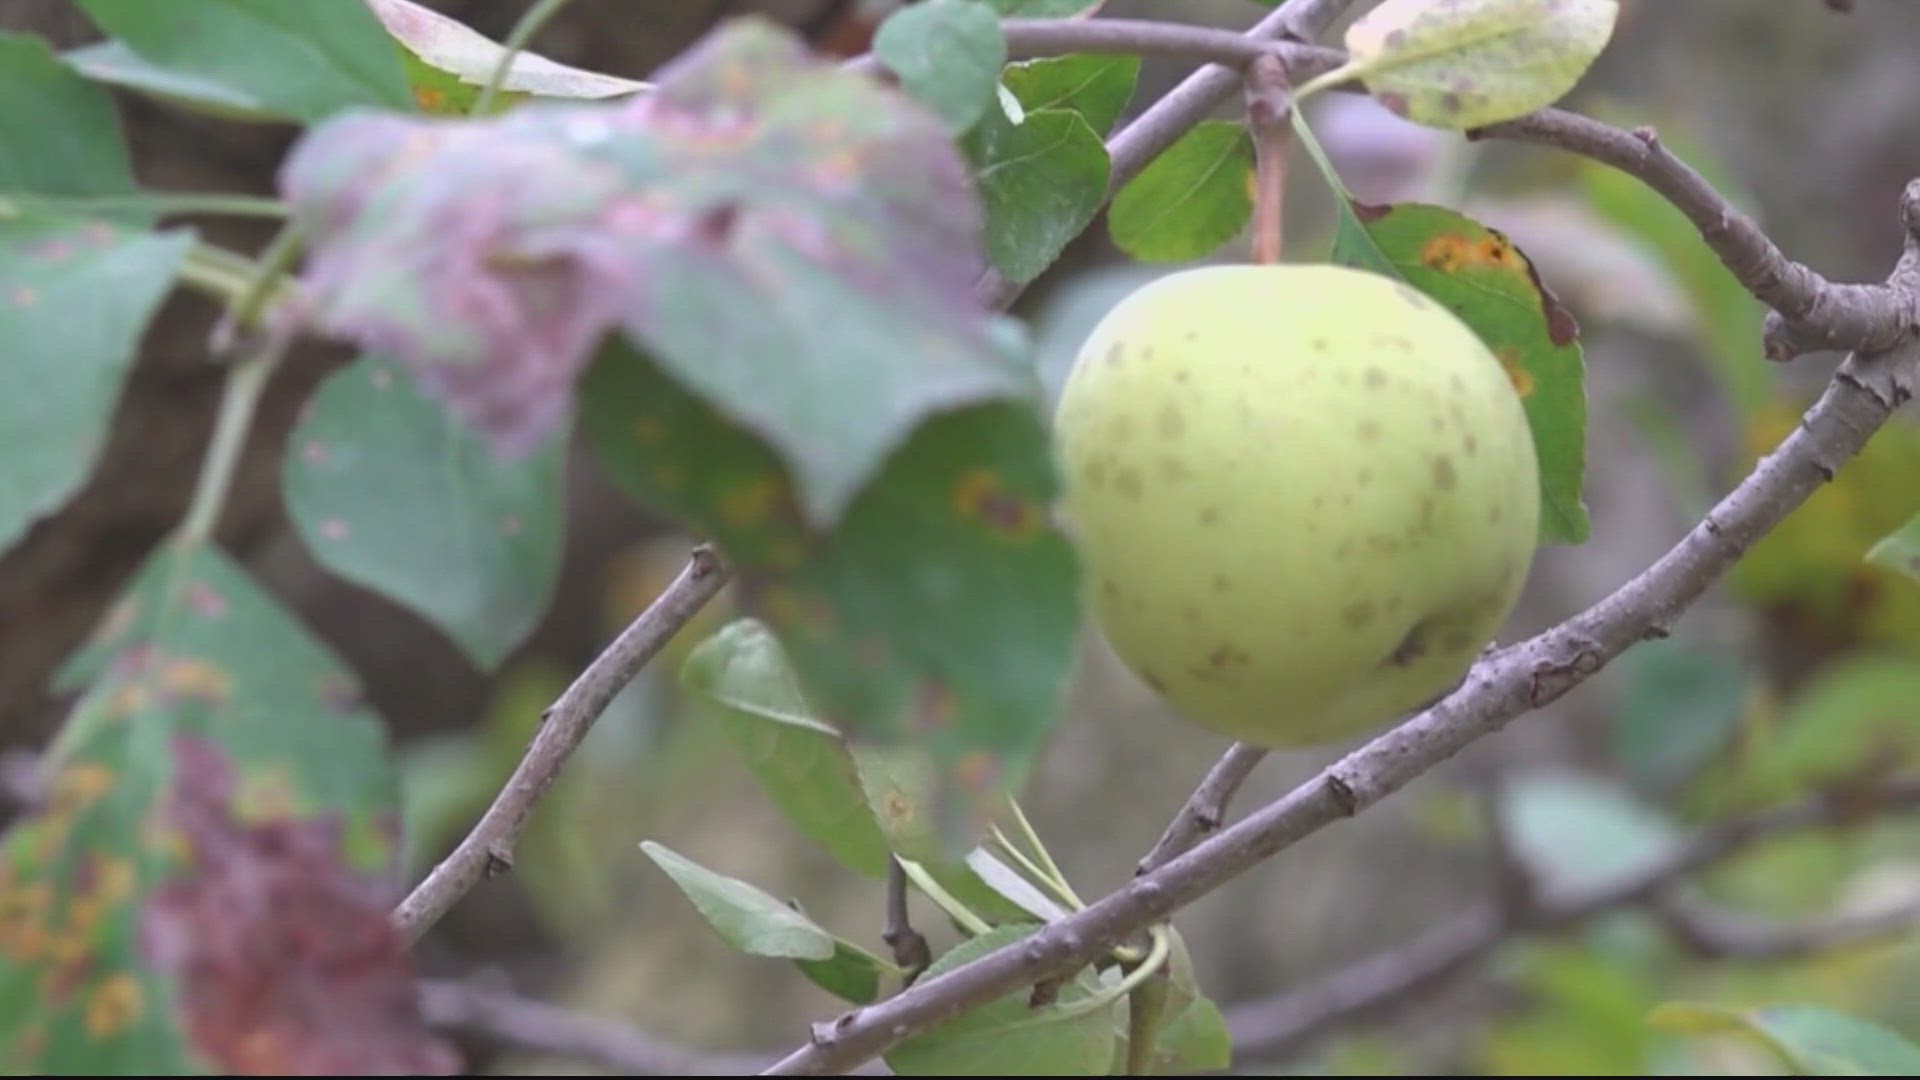 There's a moderate drought in the Shenandoah Valley Region of Virginia, and it's impacting some apple orchards in that area.